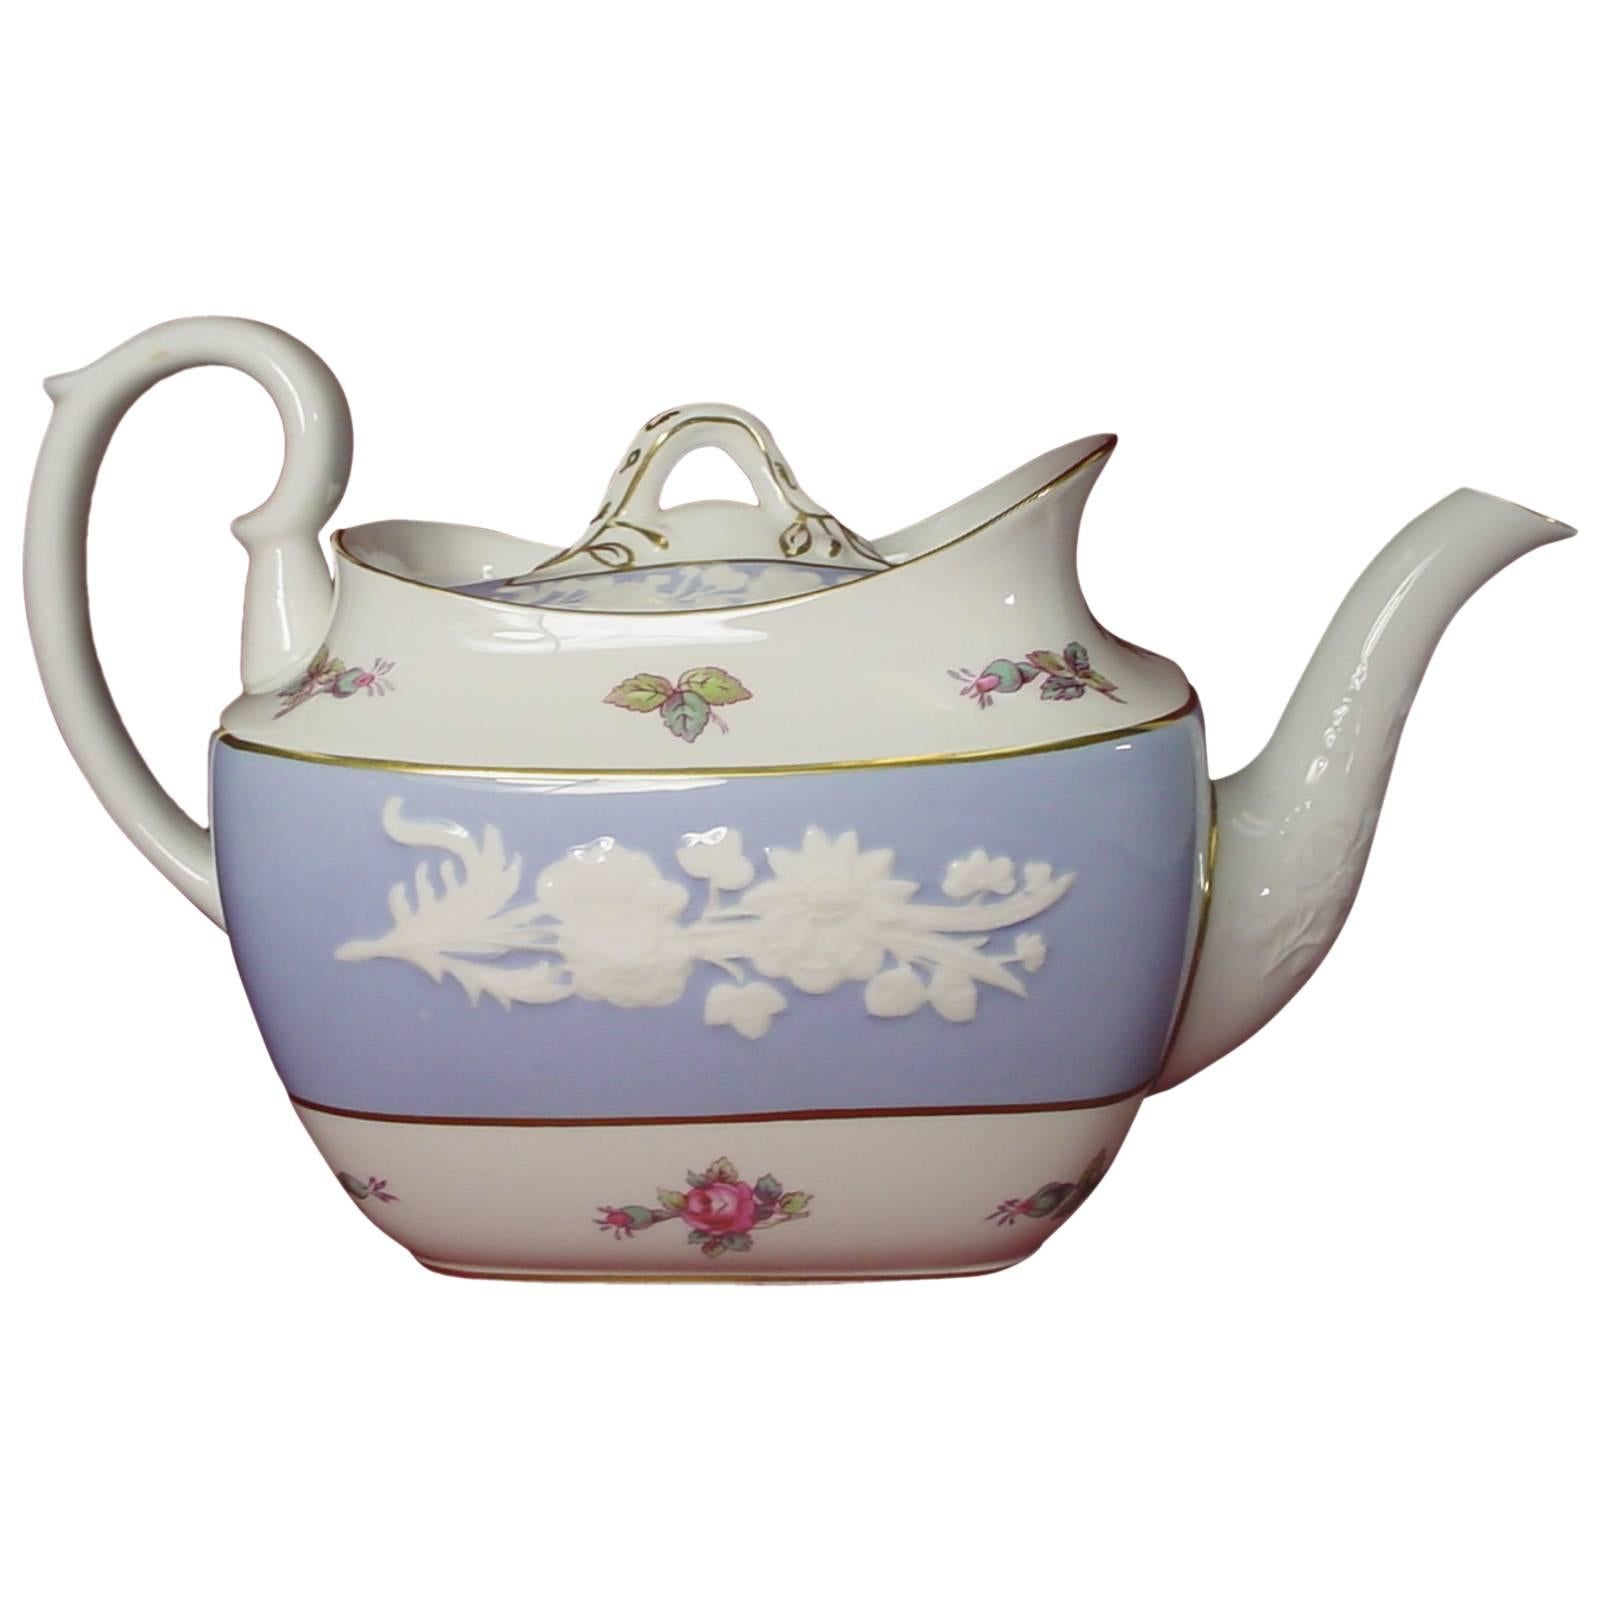 Spode China Maritime Rose Blue R4118 Scalloped Pattern Teapot with Lid For Sale